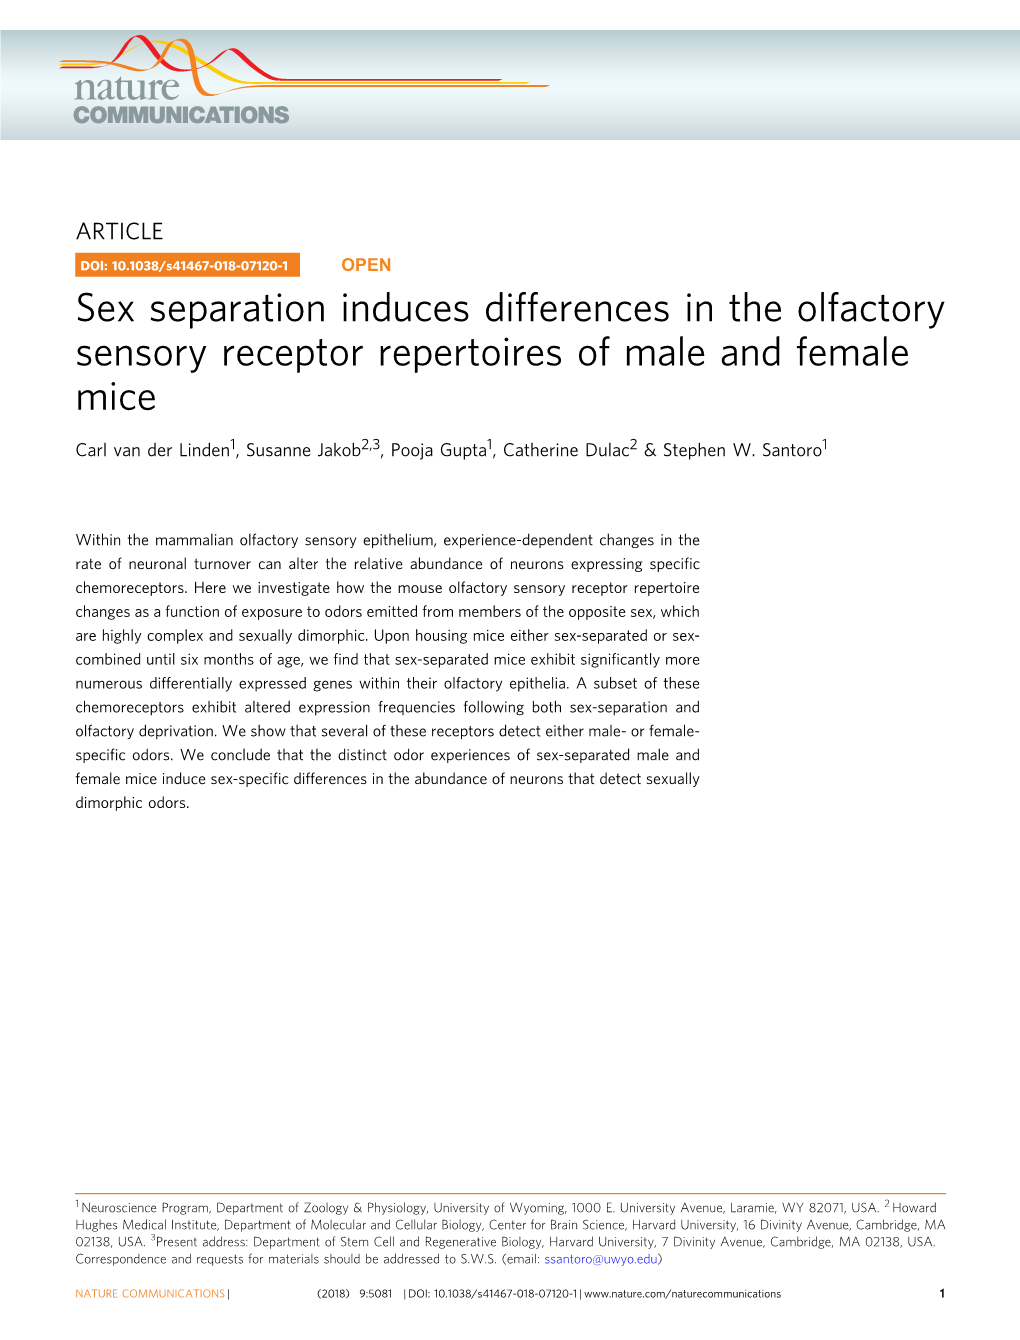 Sex Separation Induces Differences in the Olfactory Sensory Receptor Repertoires of Male and Female Mice